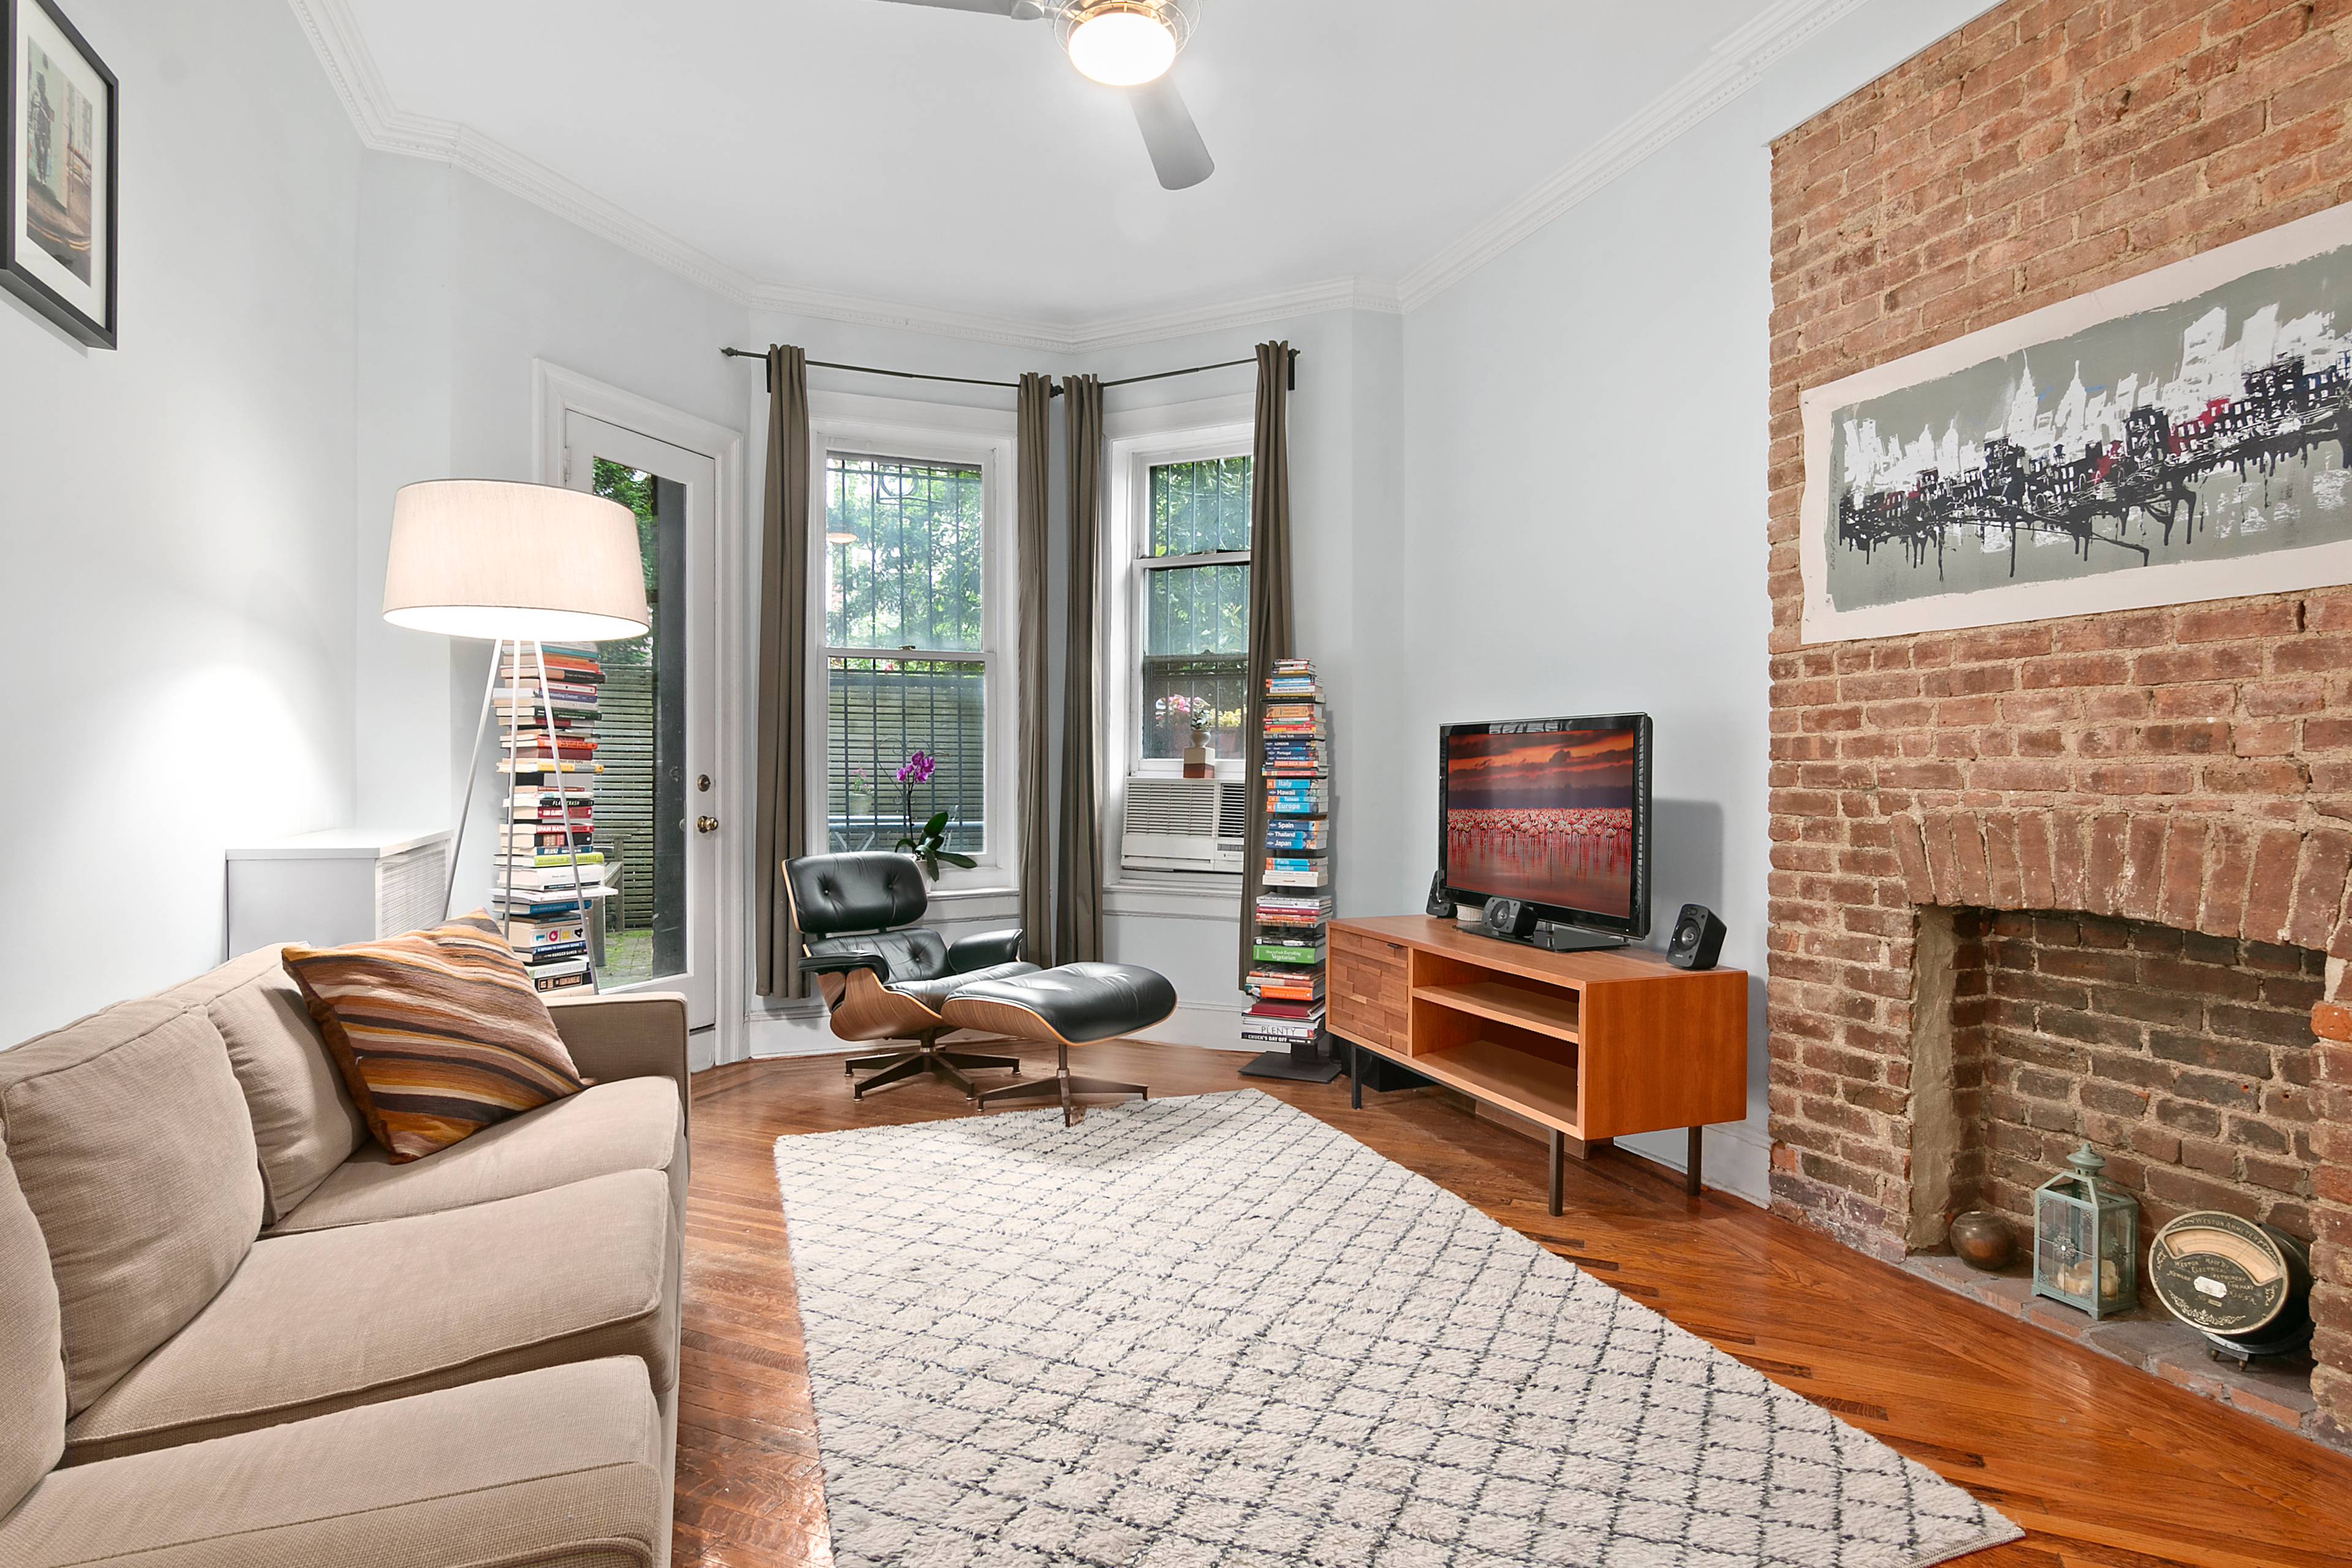 This beautiful, convertible 1 bedroom is everything you need and want in prime Cobble Hill.